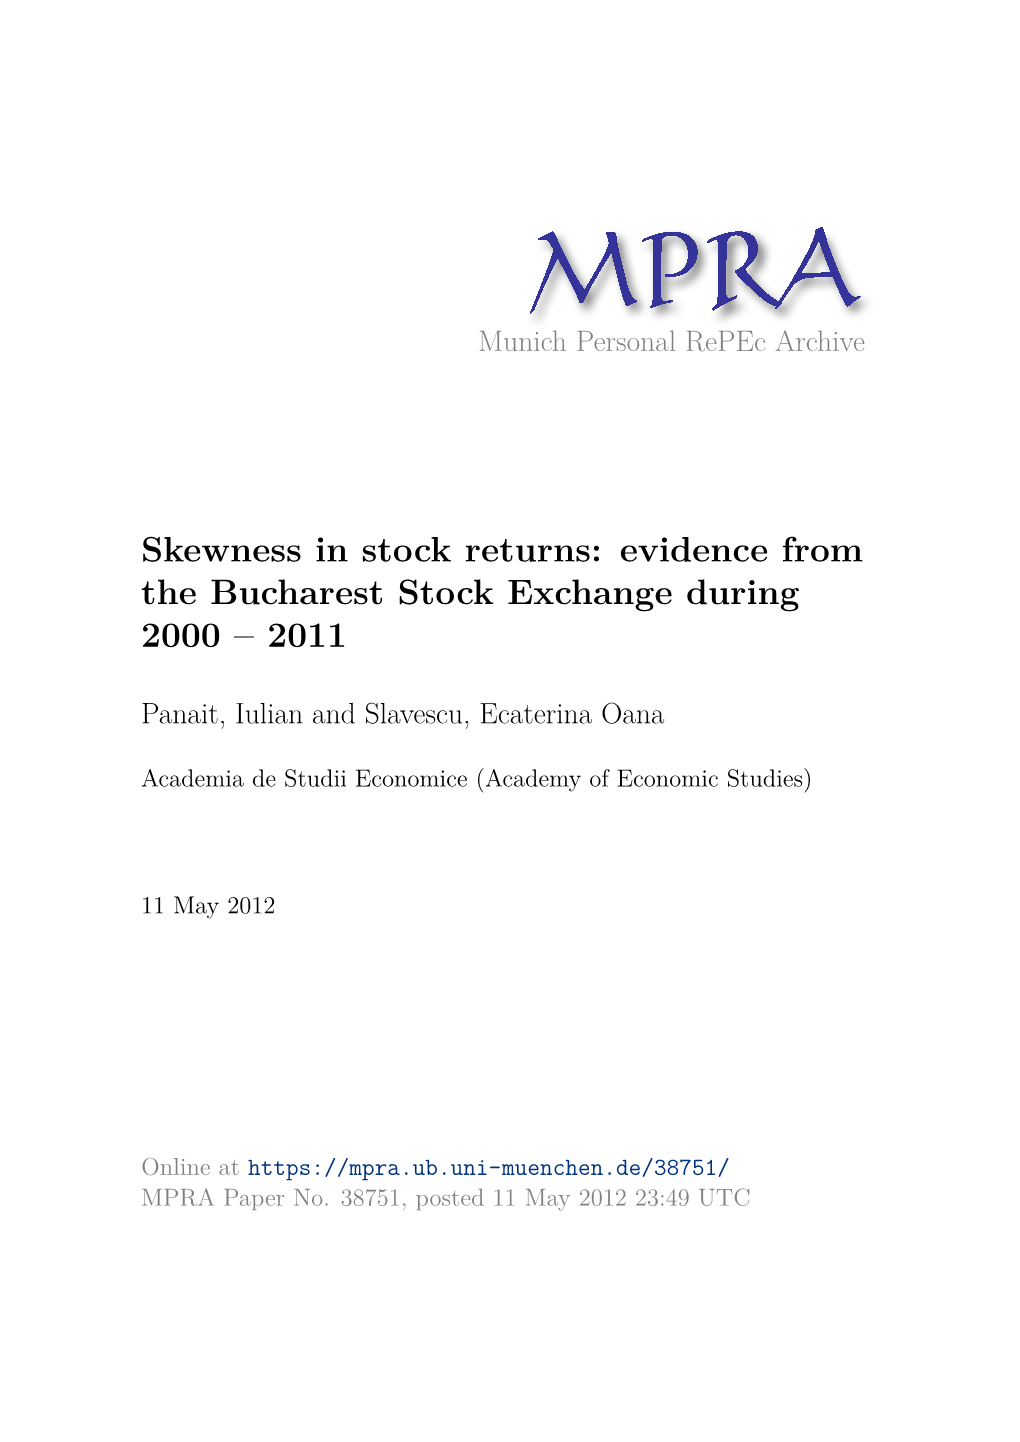 Evidence from the Bucharest Stock Exchange During 2000 – 2011